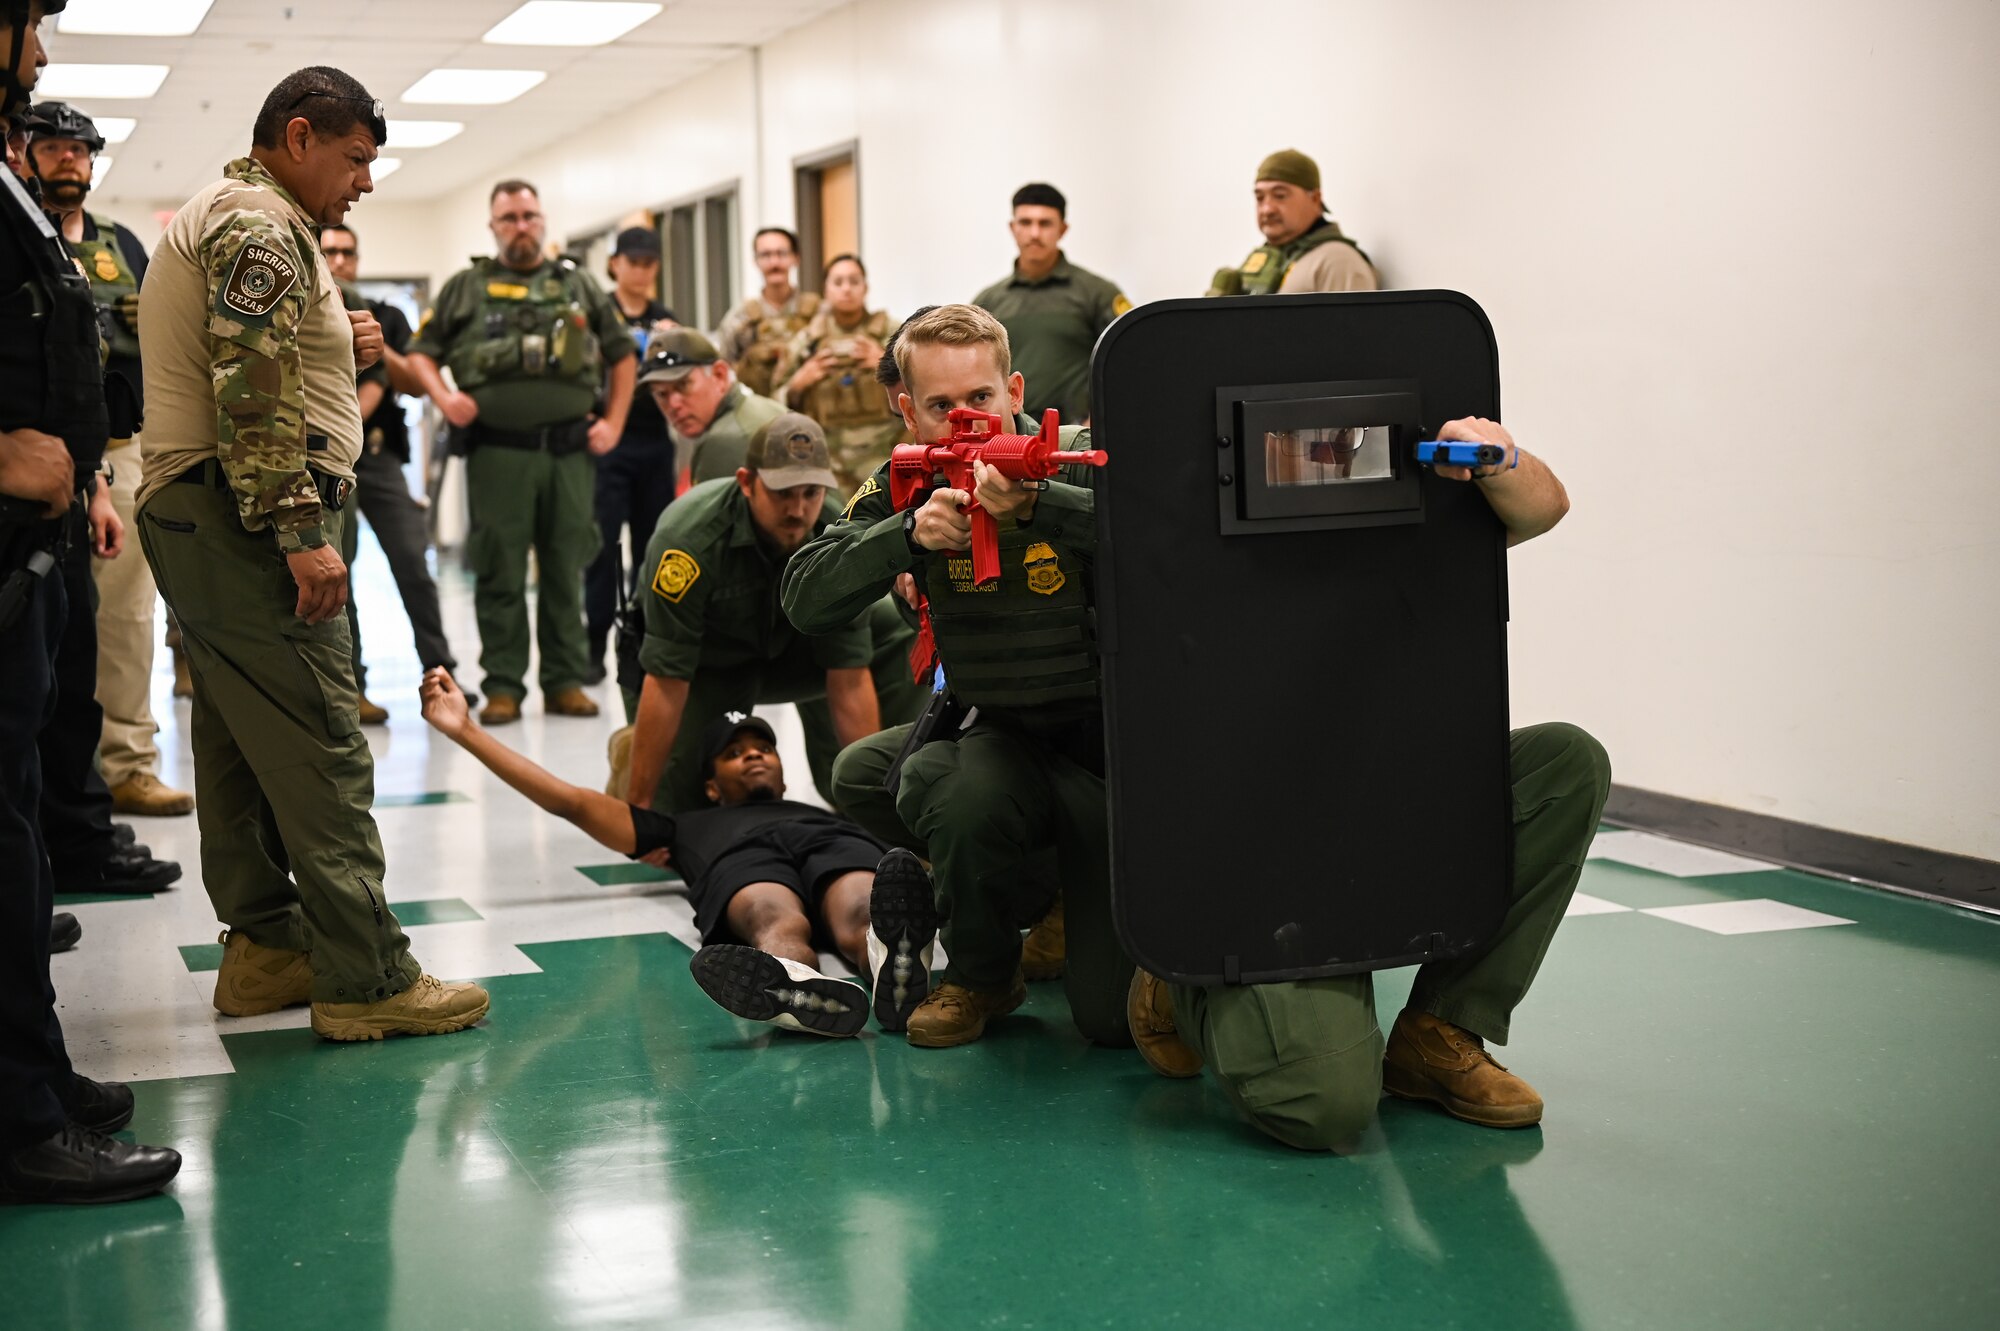 Customs and border protection (CBP) border patrol officers pull a simulated victim behind a ballistic shield during a training exercise alongside Laughlin Air Force Base's Security Forces at San Felipe Memorial Middle School, Texas, July 12, 2023.